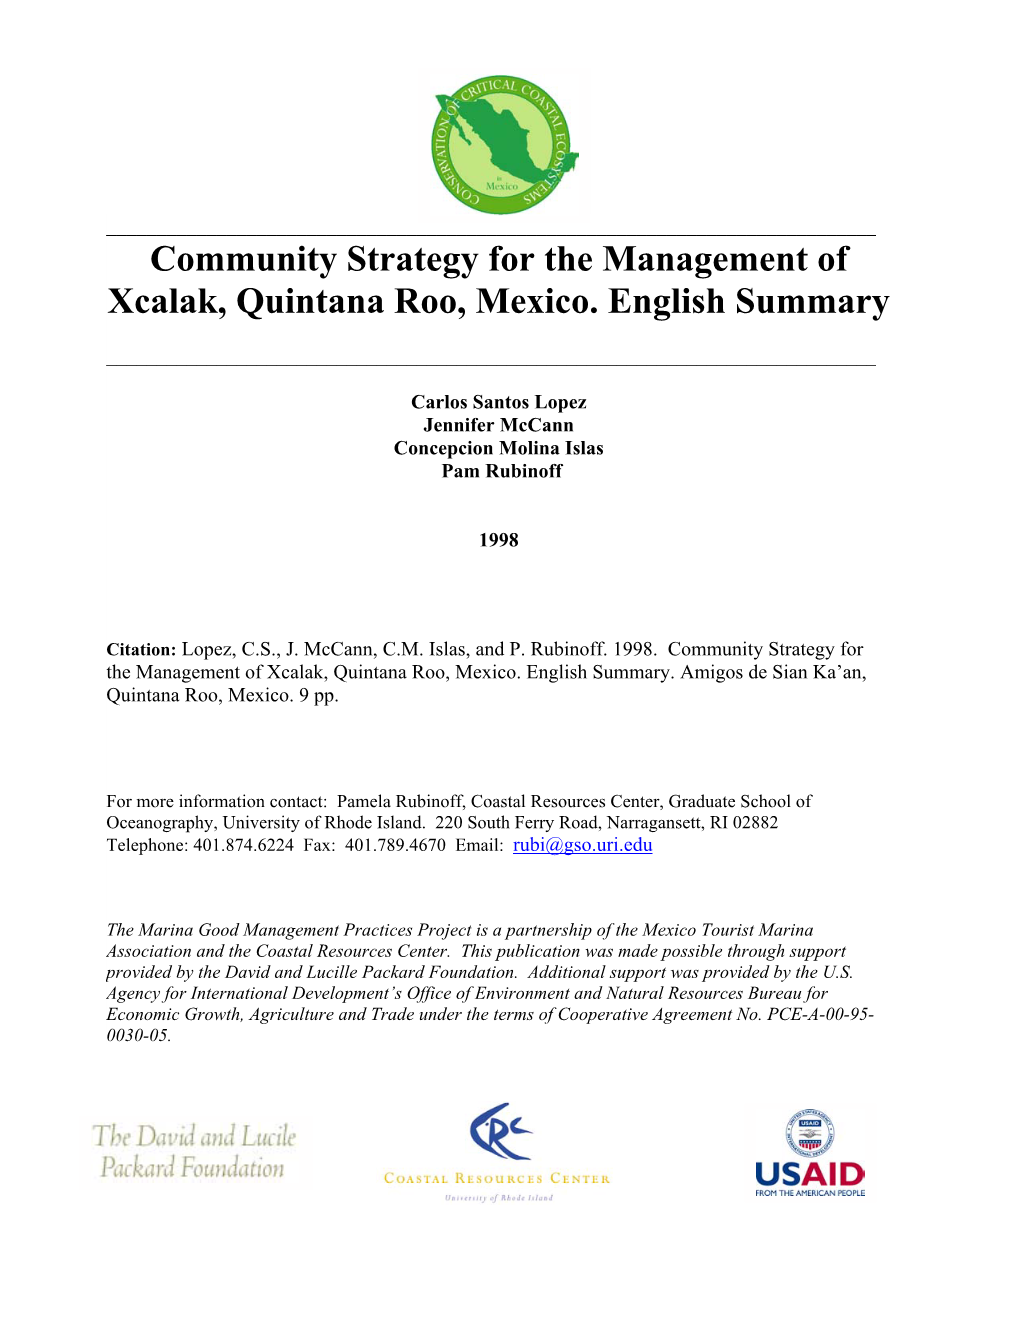 Community Strategy for the Management of Xcalak, Quintana Roo, Mexico. English Summary